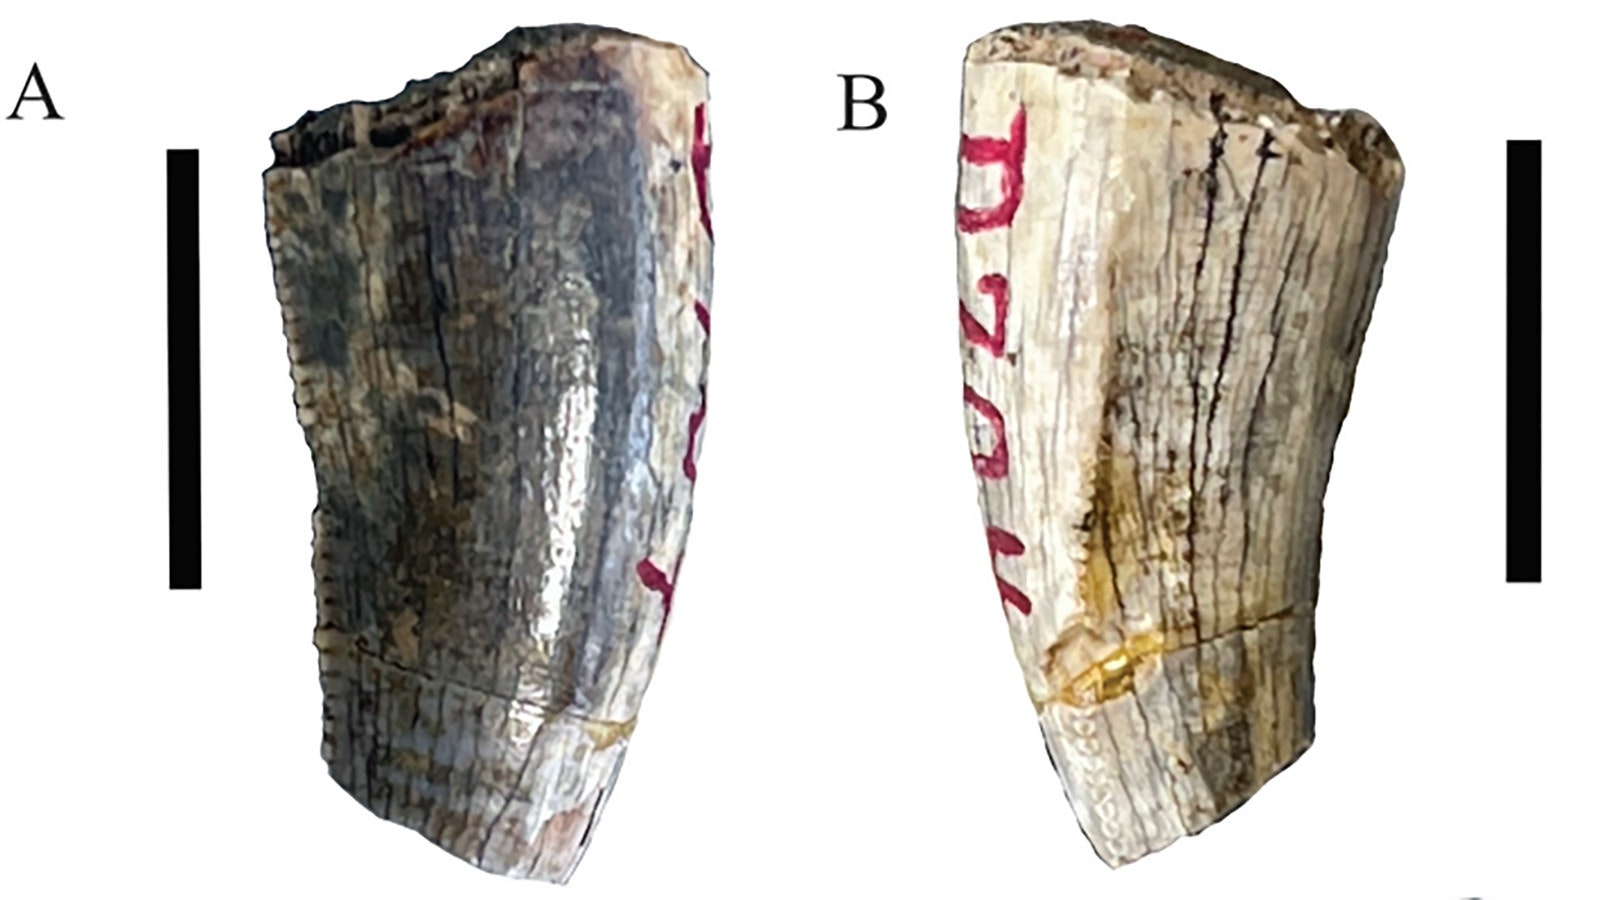 The juvenile Tyrannosaurus tooth found near Mount Hancock in the southeastern corner of Yellowstone National Park.